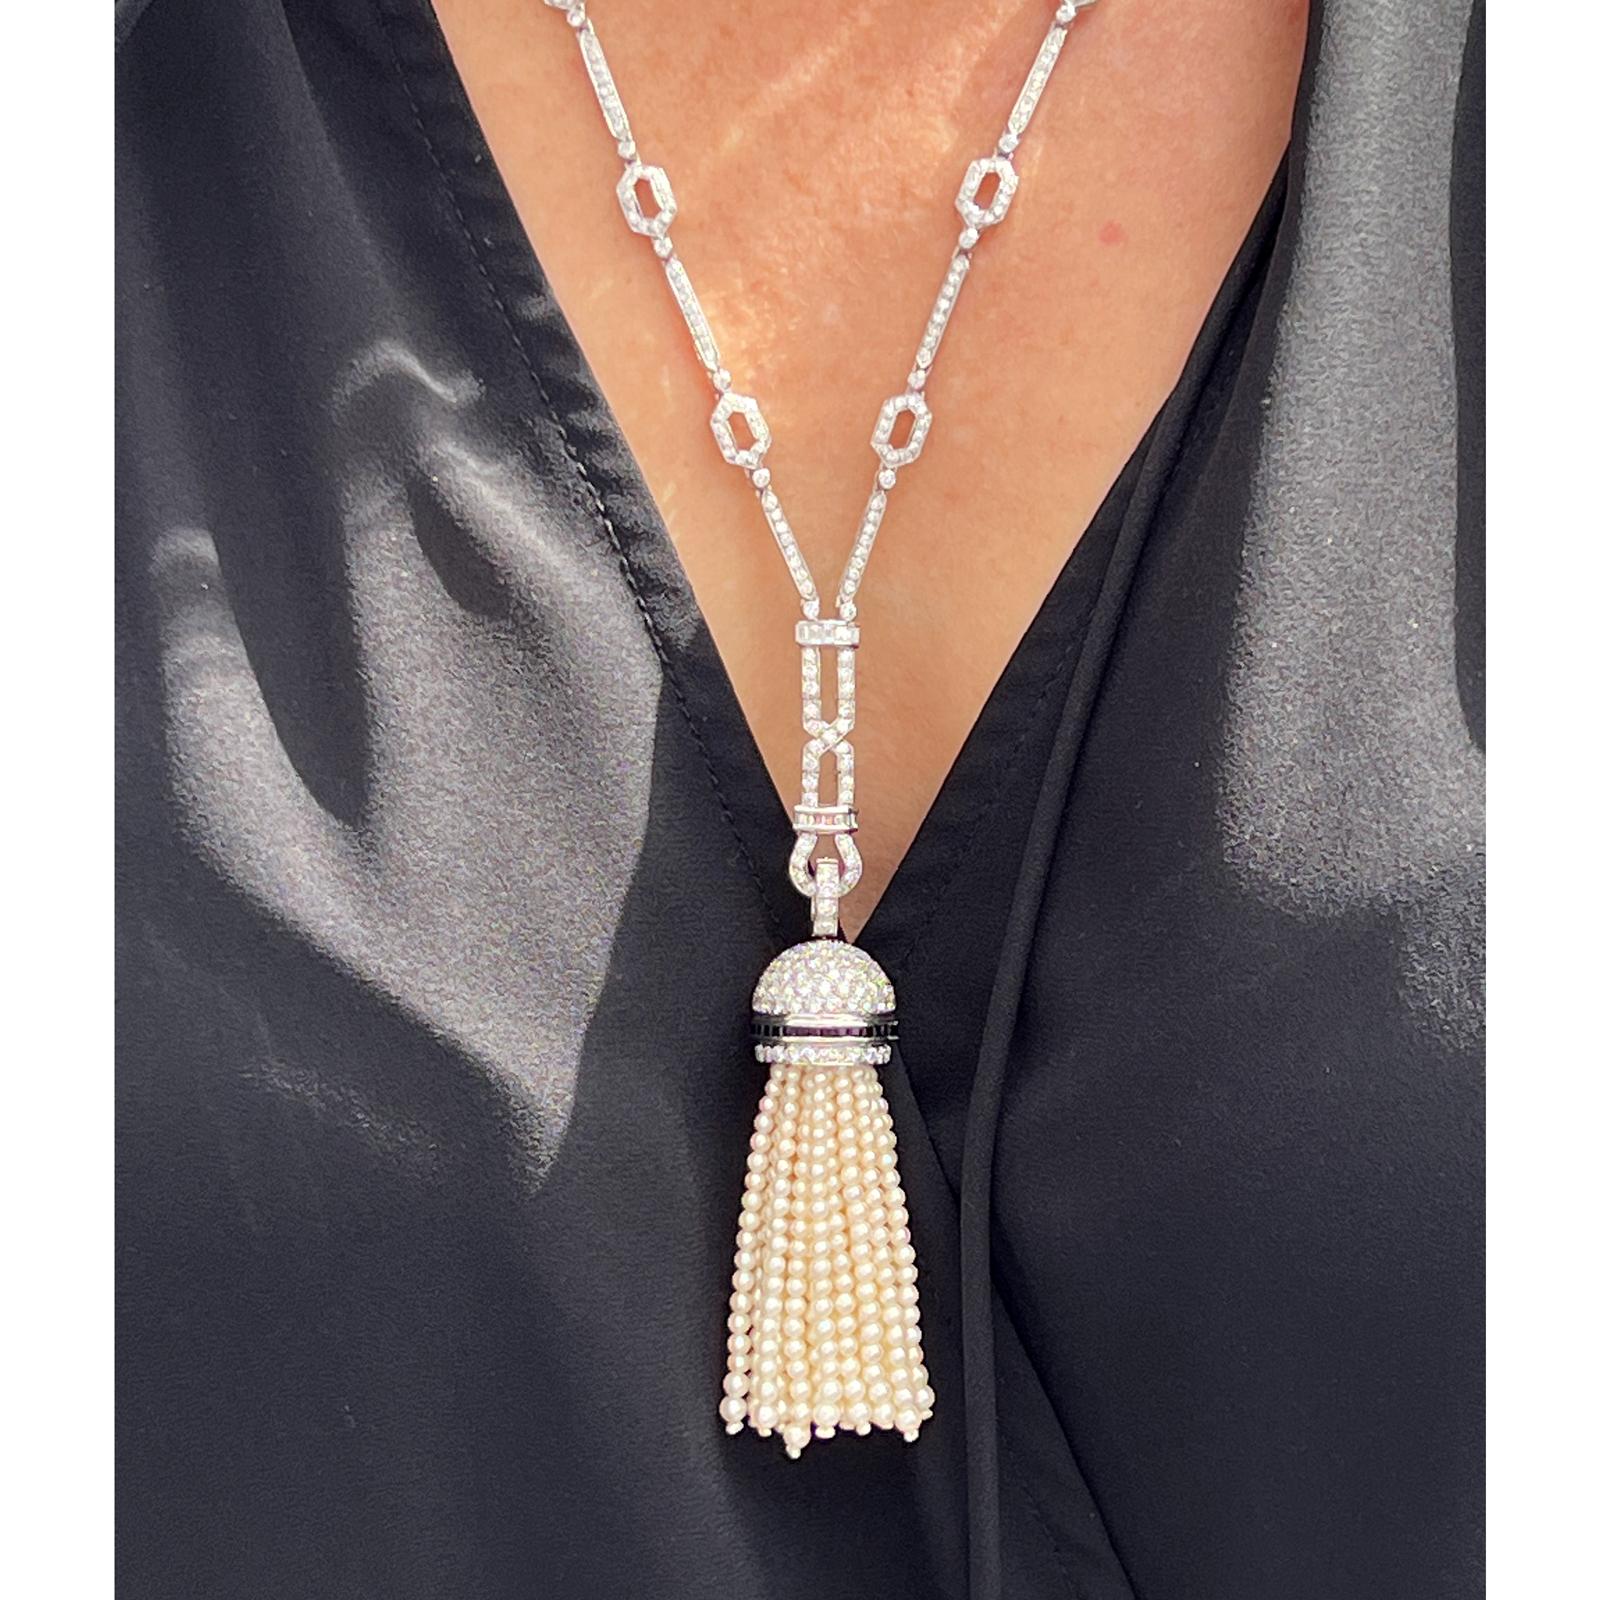 Stunning diamond link necklace with detachable diamond, pearl, and onyx tassel fashioned in 18 karat white gold. The necklace measures 21 inches in length and features round brilliant cut diamonds weighing approximately 7.50 CTW and graded G-H color